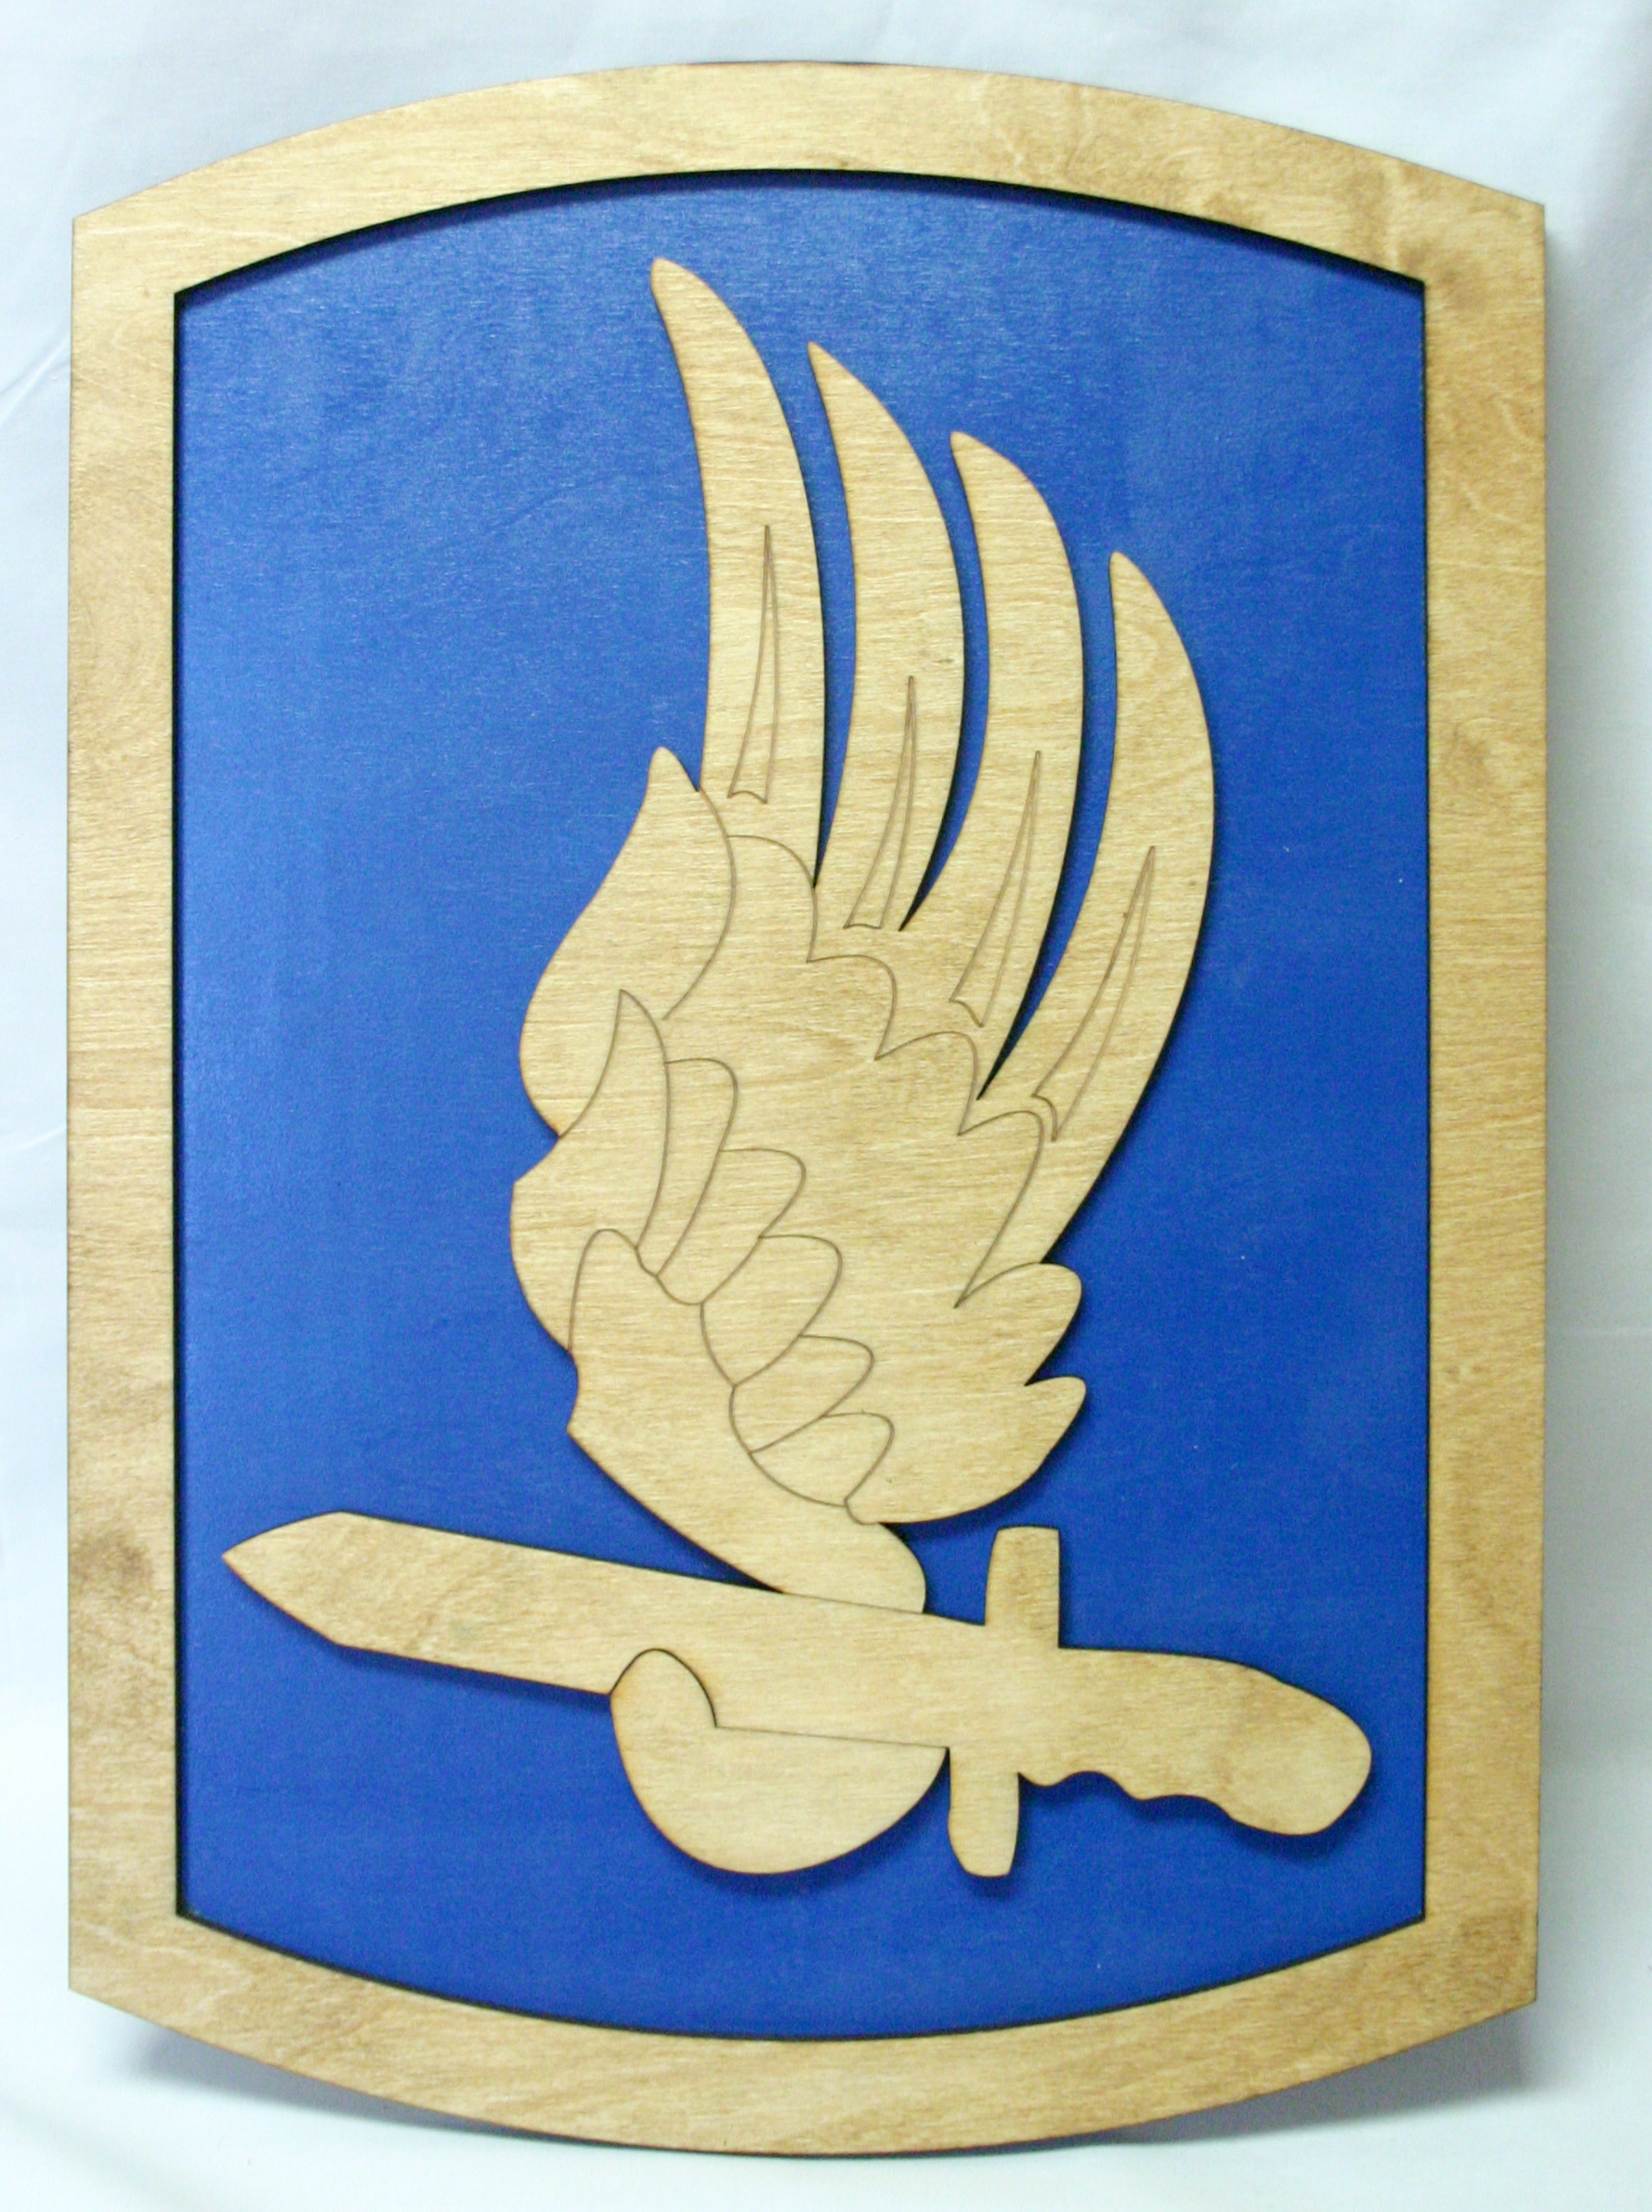 173rd Airborne Wall Insignia